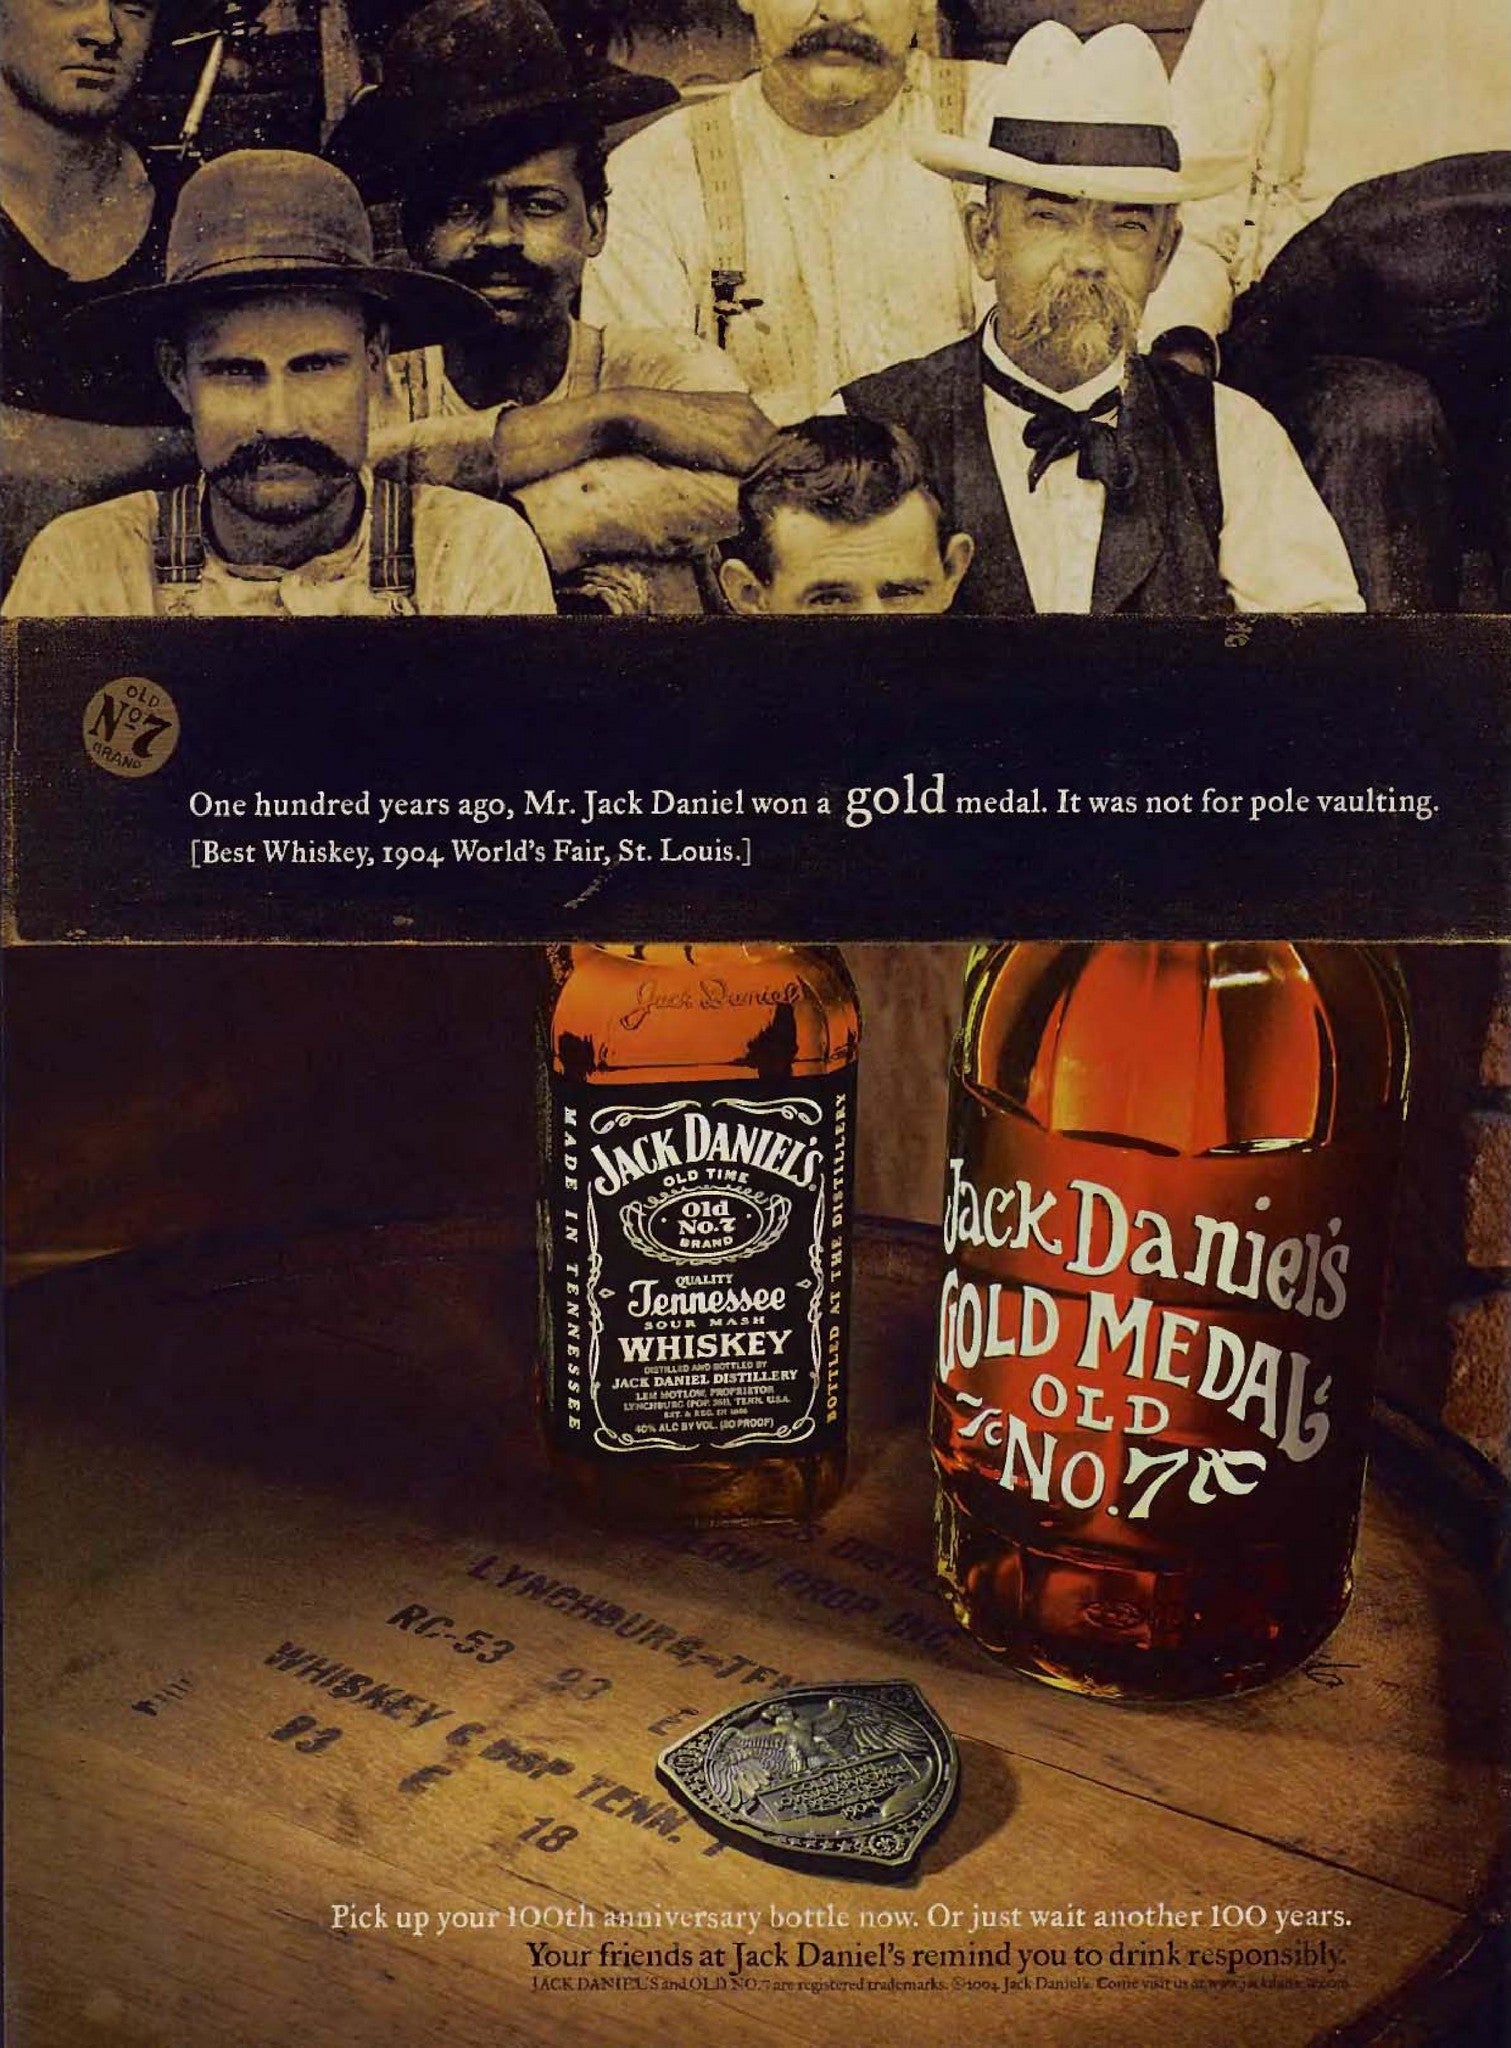 Over more then a hundred years ago, Mr. Jack Daniel won a gold medal.